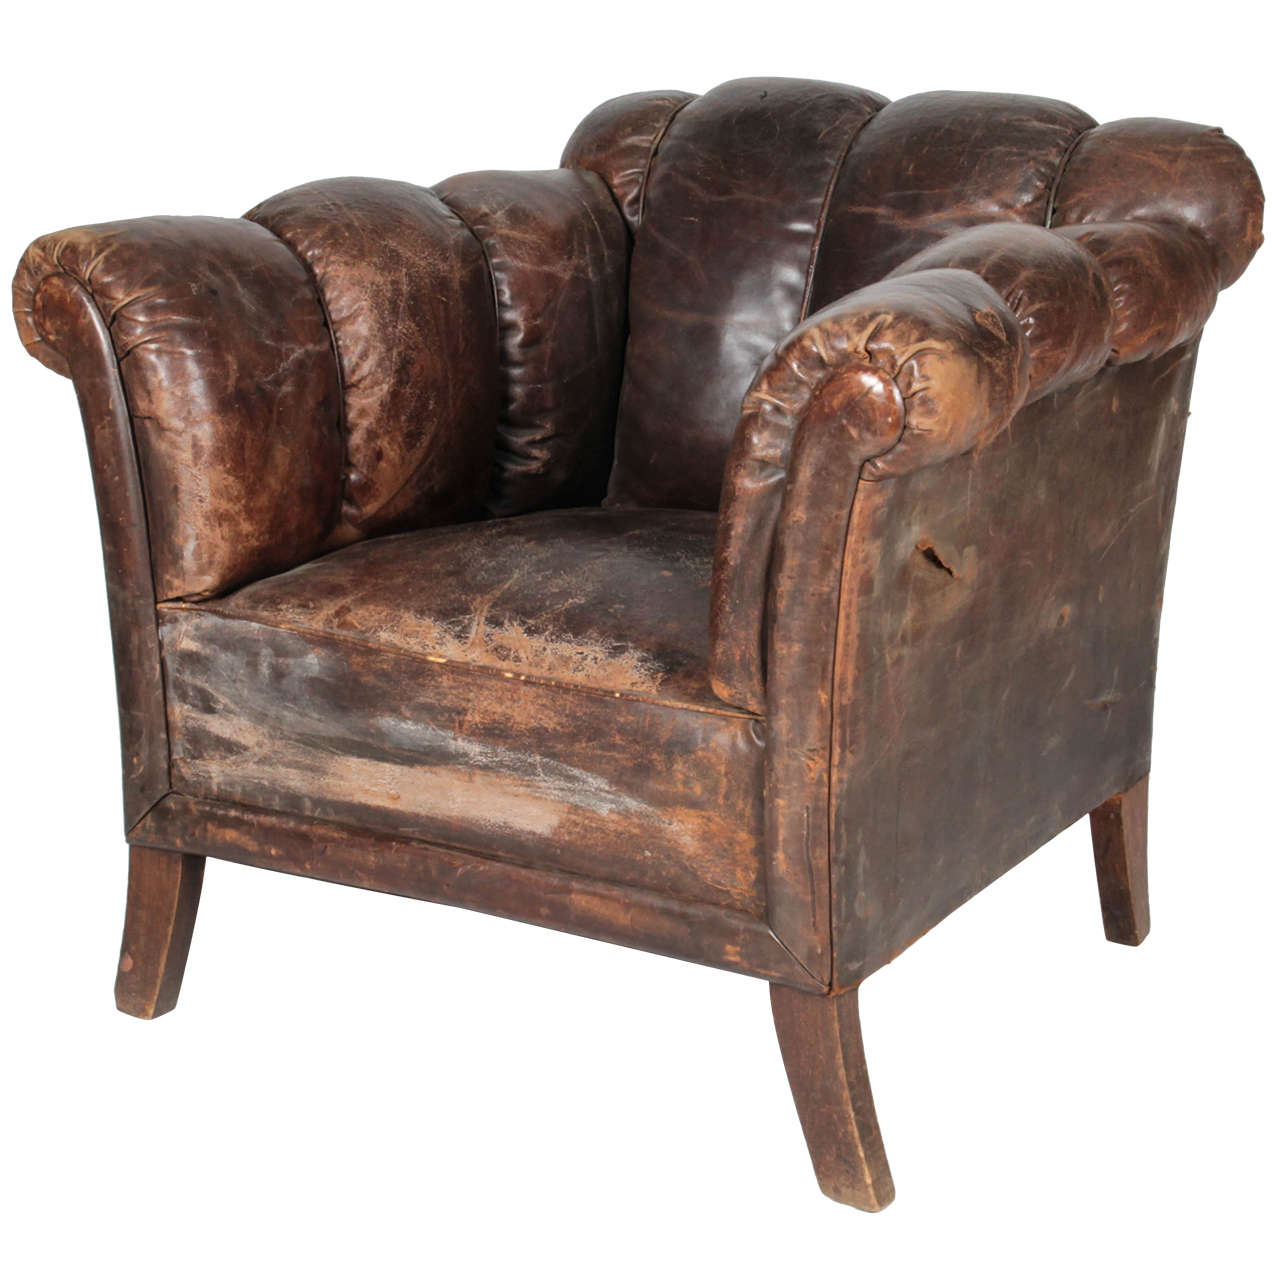 20th Century, Distressed Vertical-Tufted Leather Club Chair For Sale